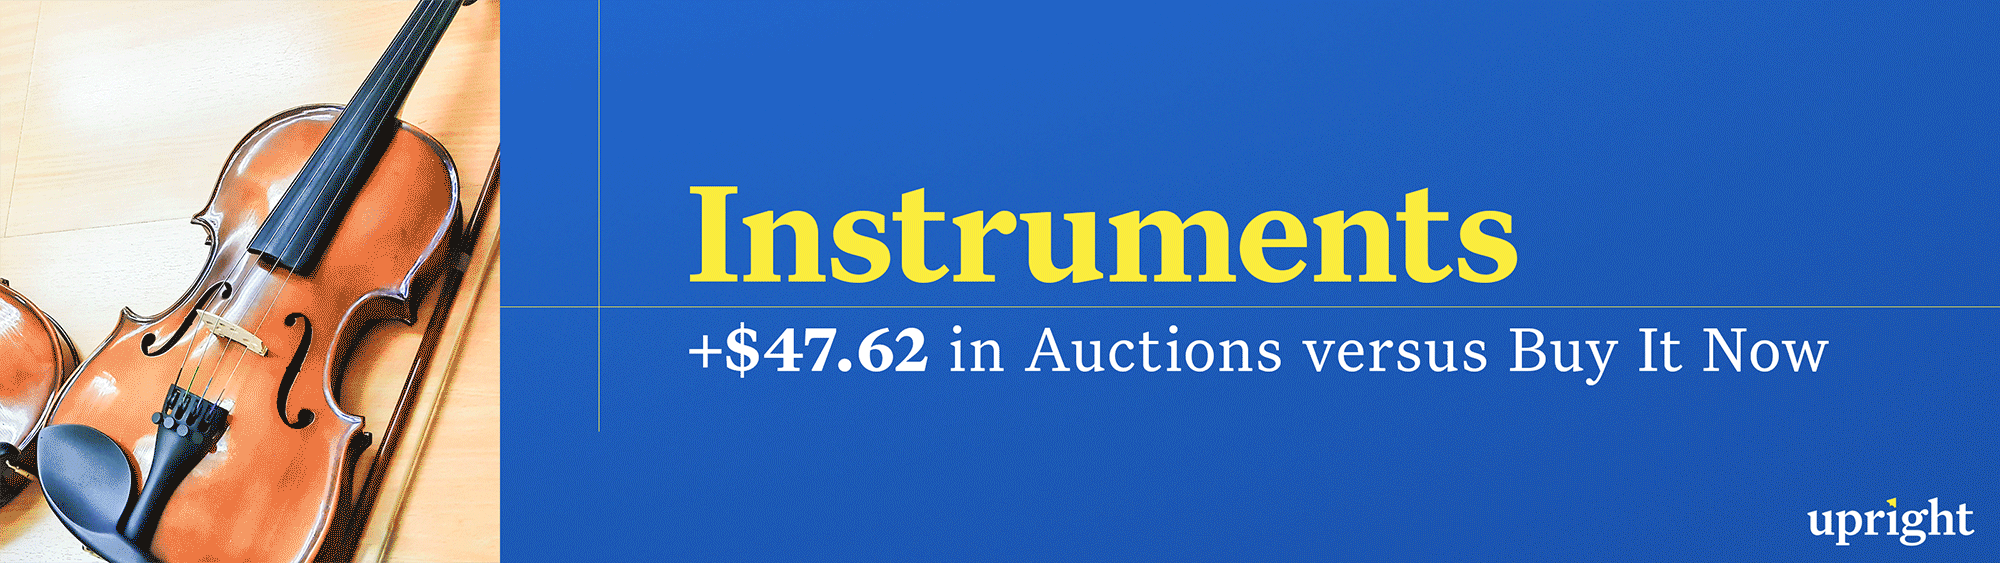 Instruments, Antiques, and Jewelry earn more in auction